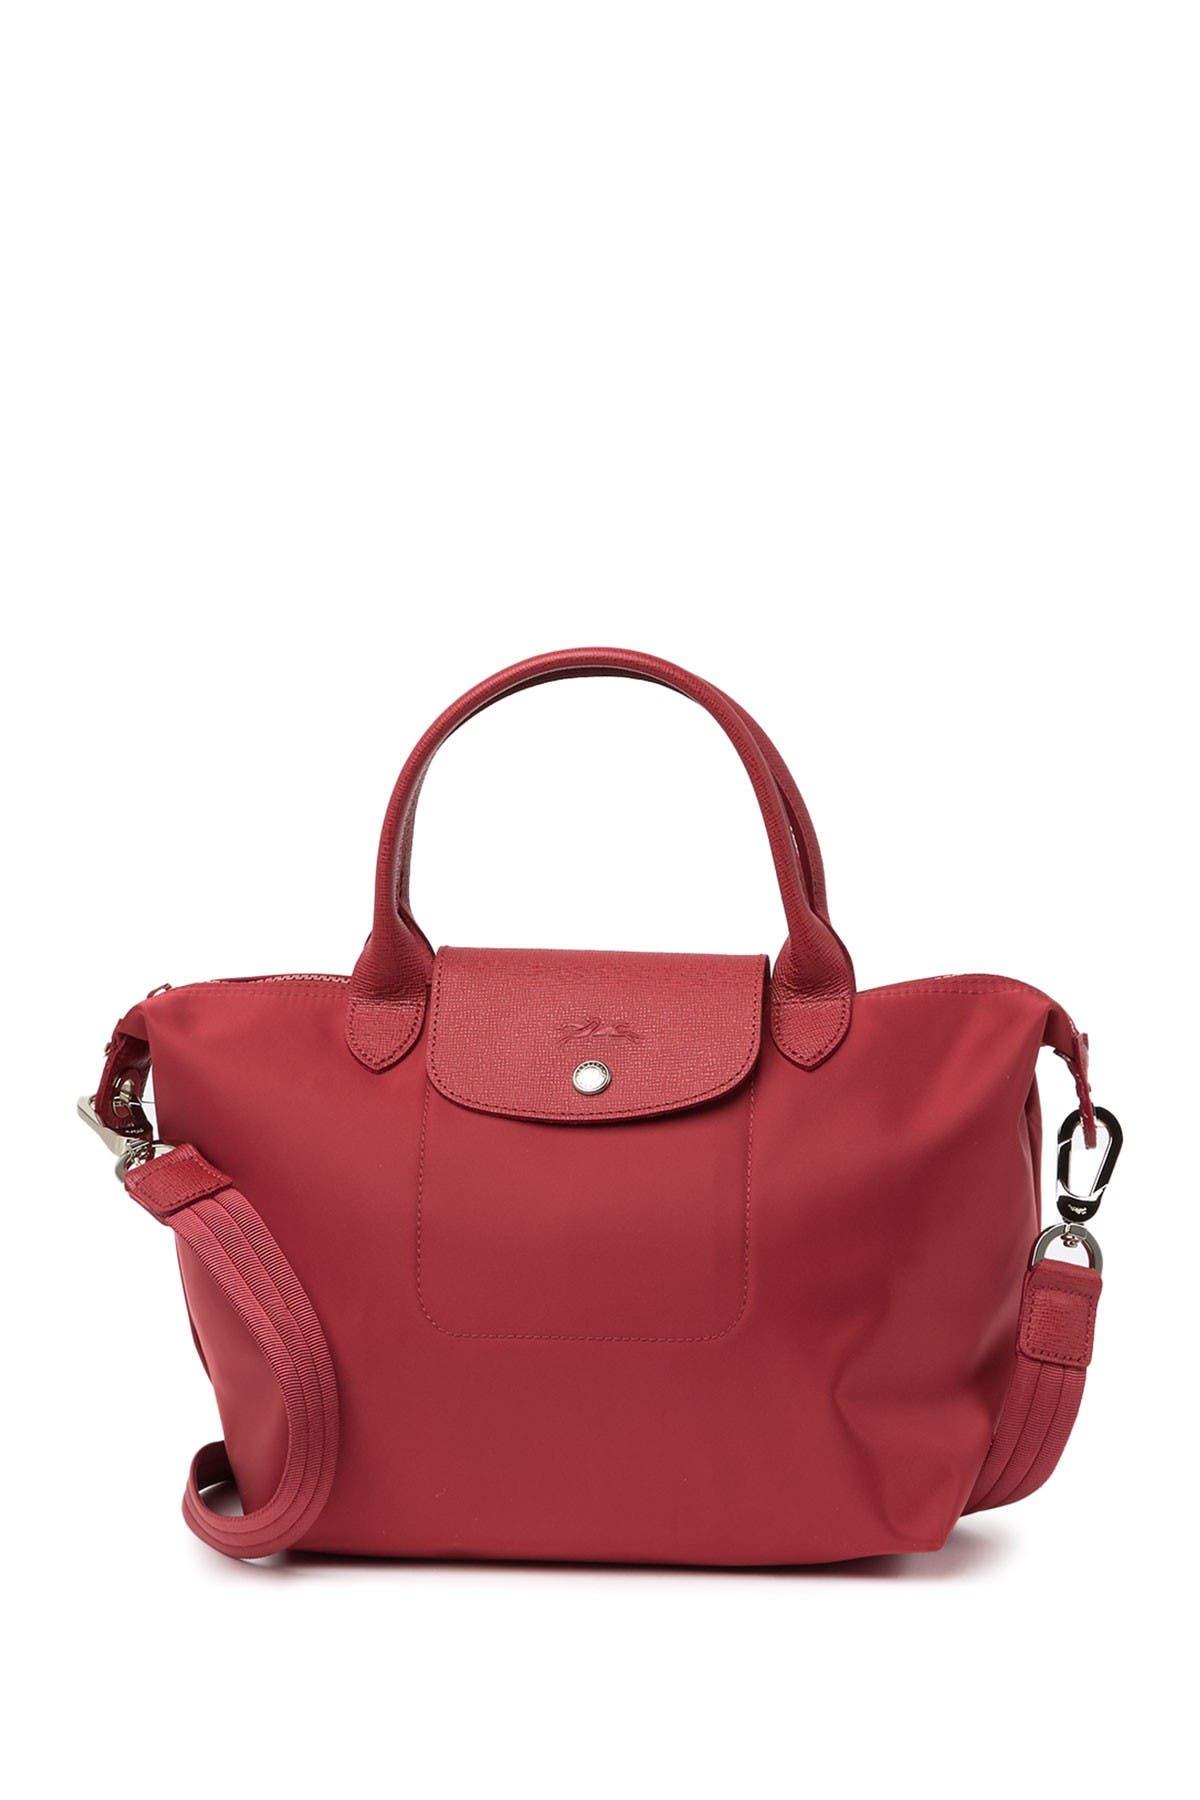 Longchamp Le Pliage Neo Nylon Satchel In Red At Nordstrom Rack | Lyst